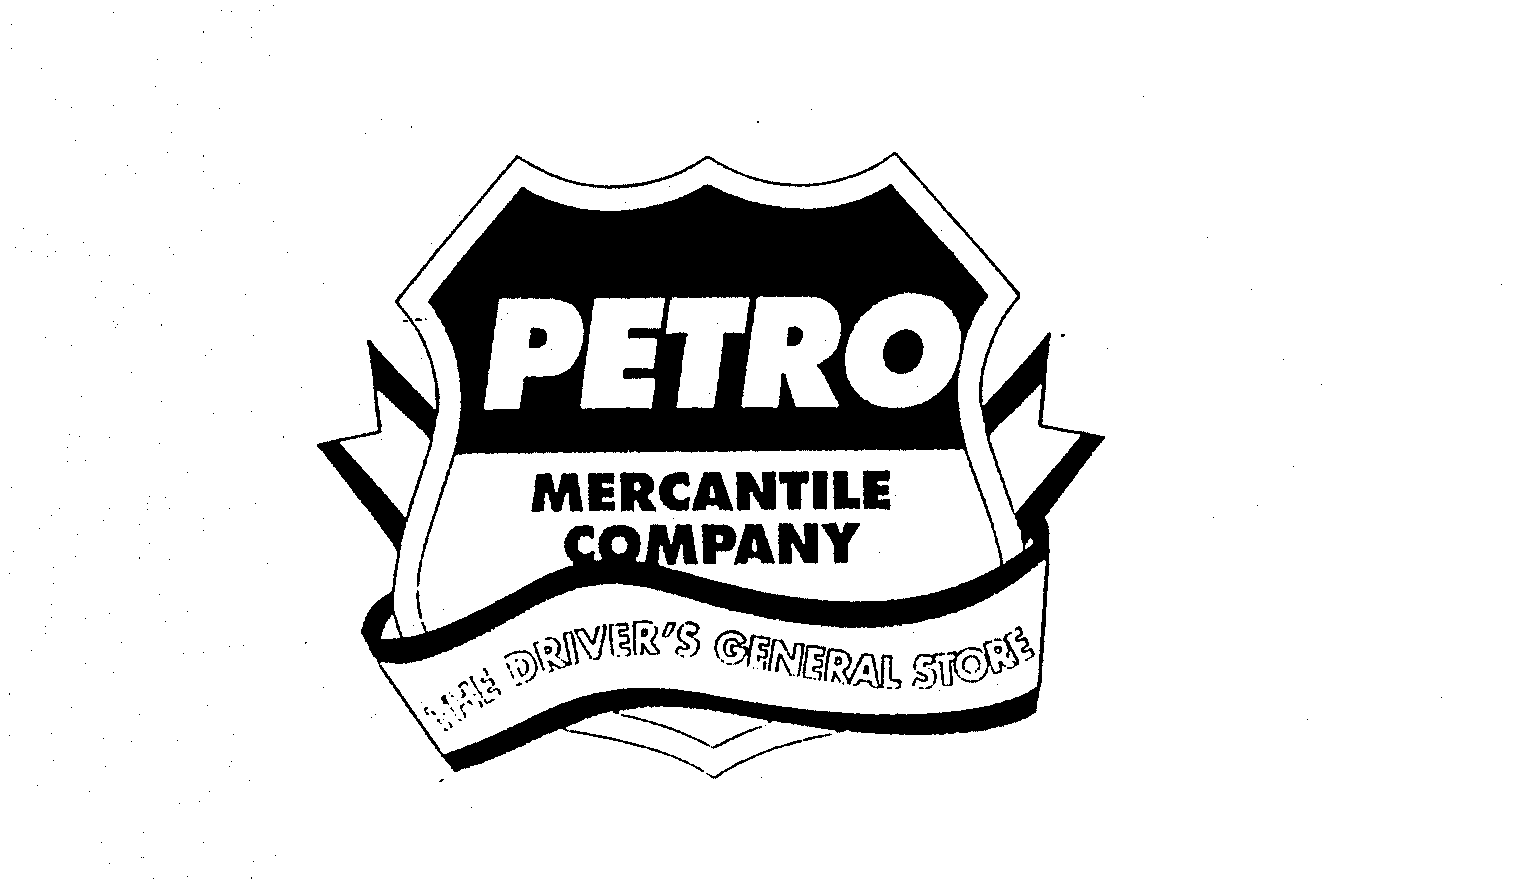  PETRO MERCANTILE COMPANY THE DRIVER'S GENERAL STORE